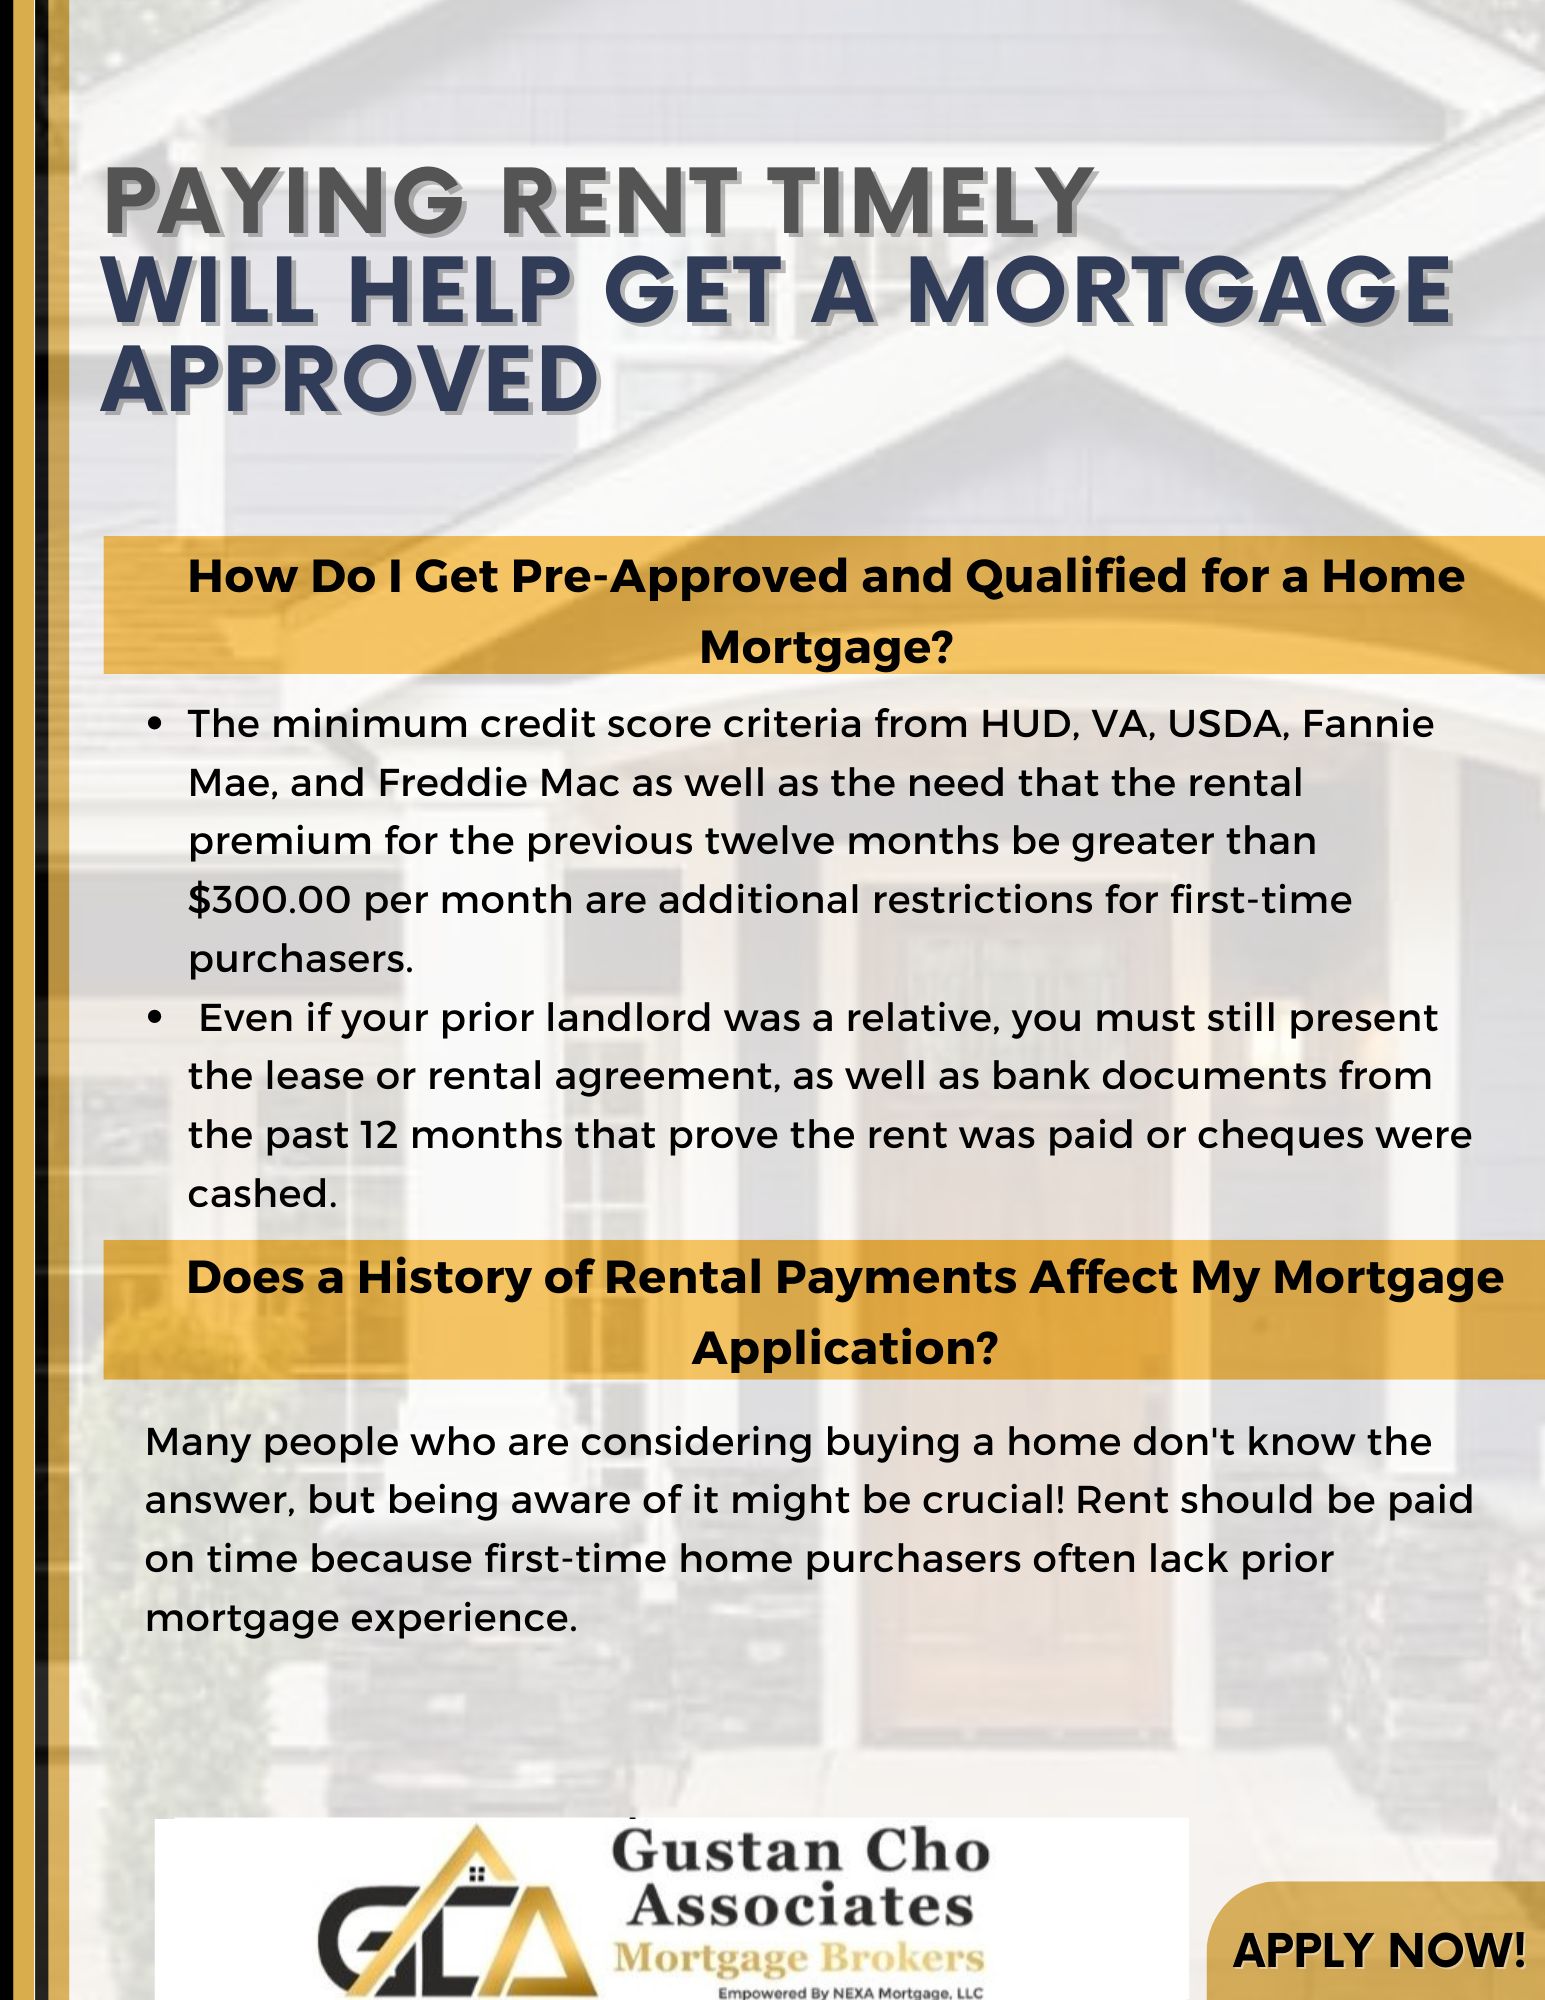 Paying Rent Timely Will Help Get a Mortgage Approved